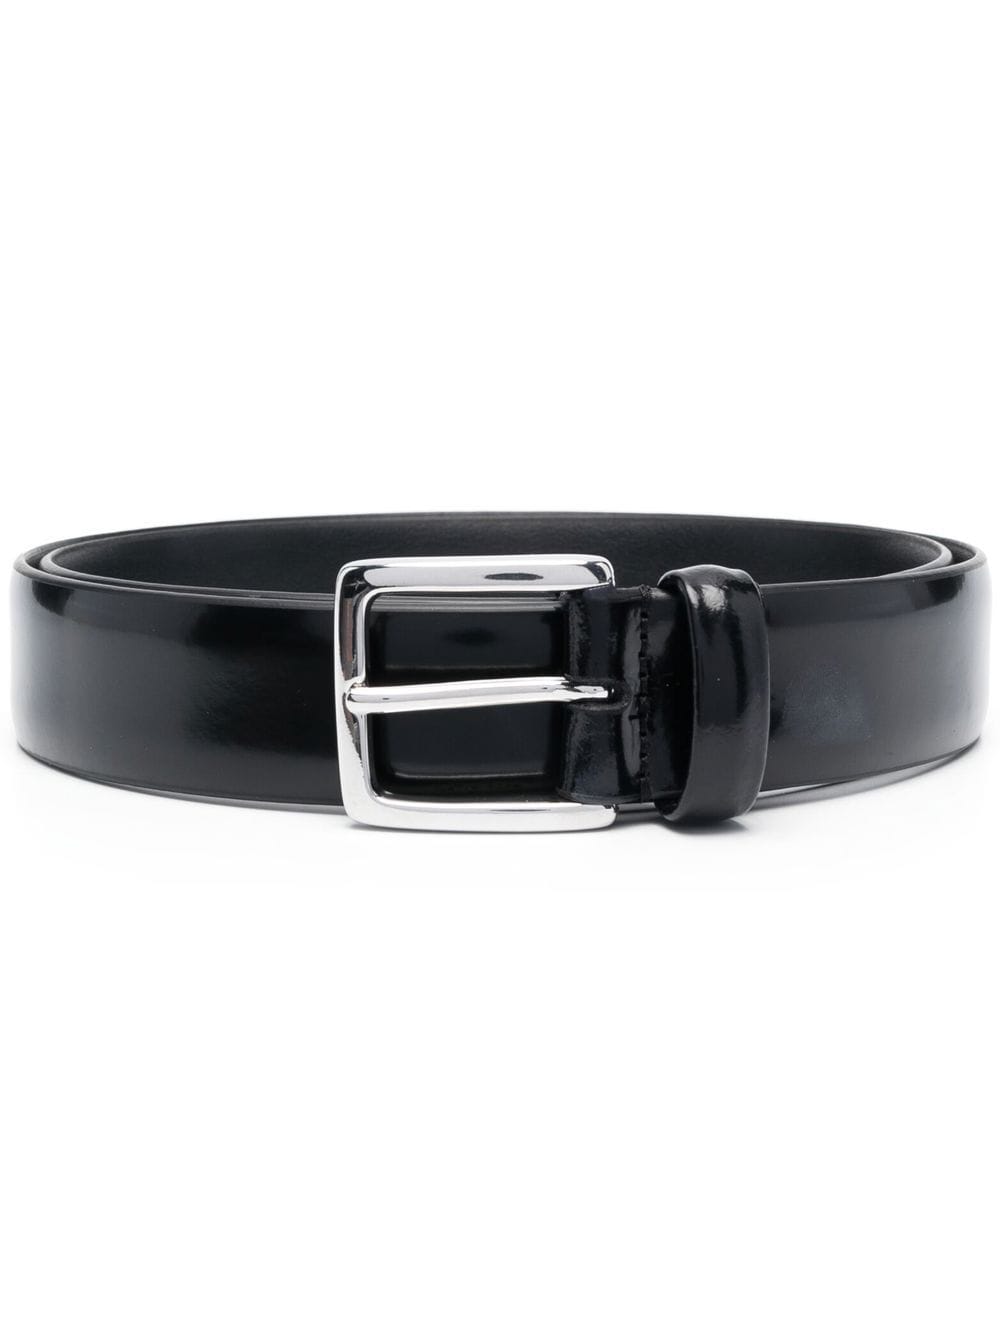 Anderson's pin-buckle leather belt - Black von Anderson's